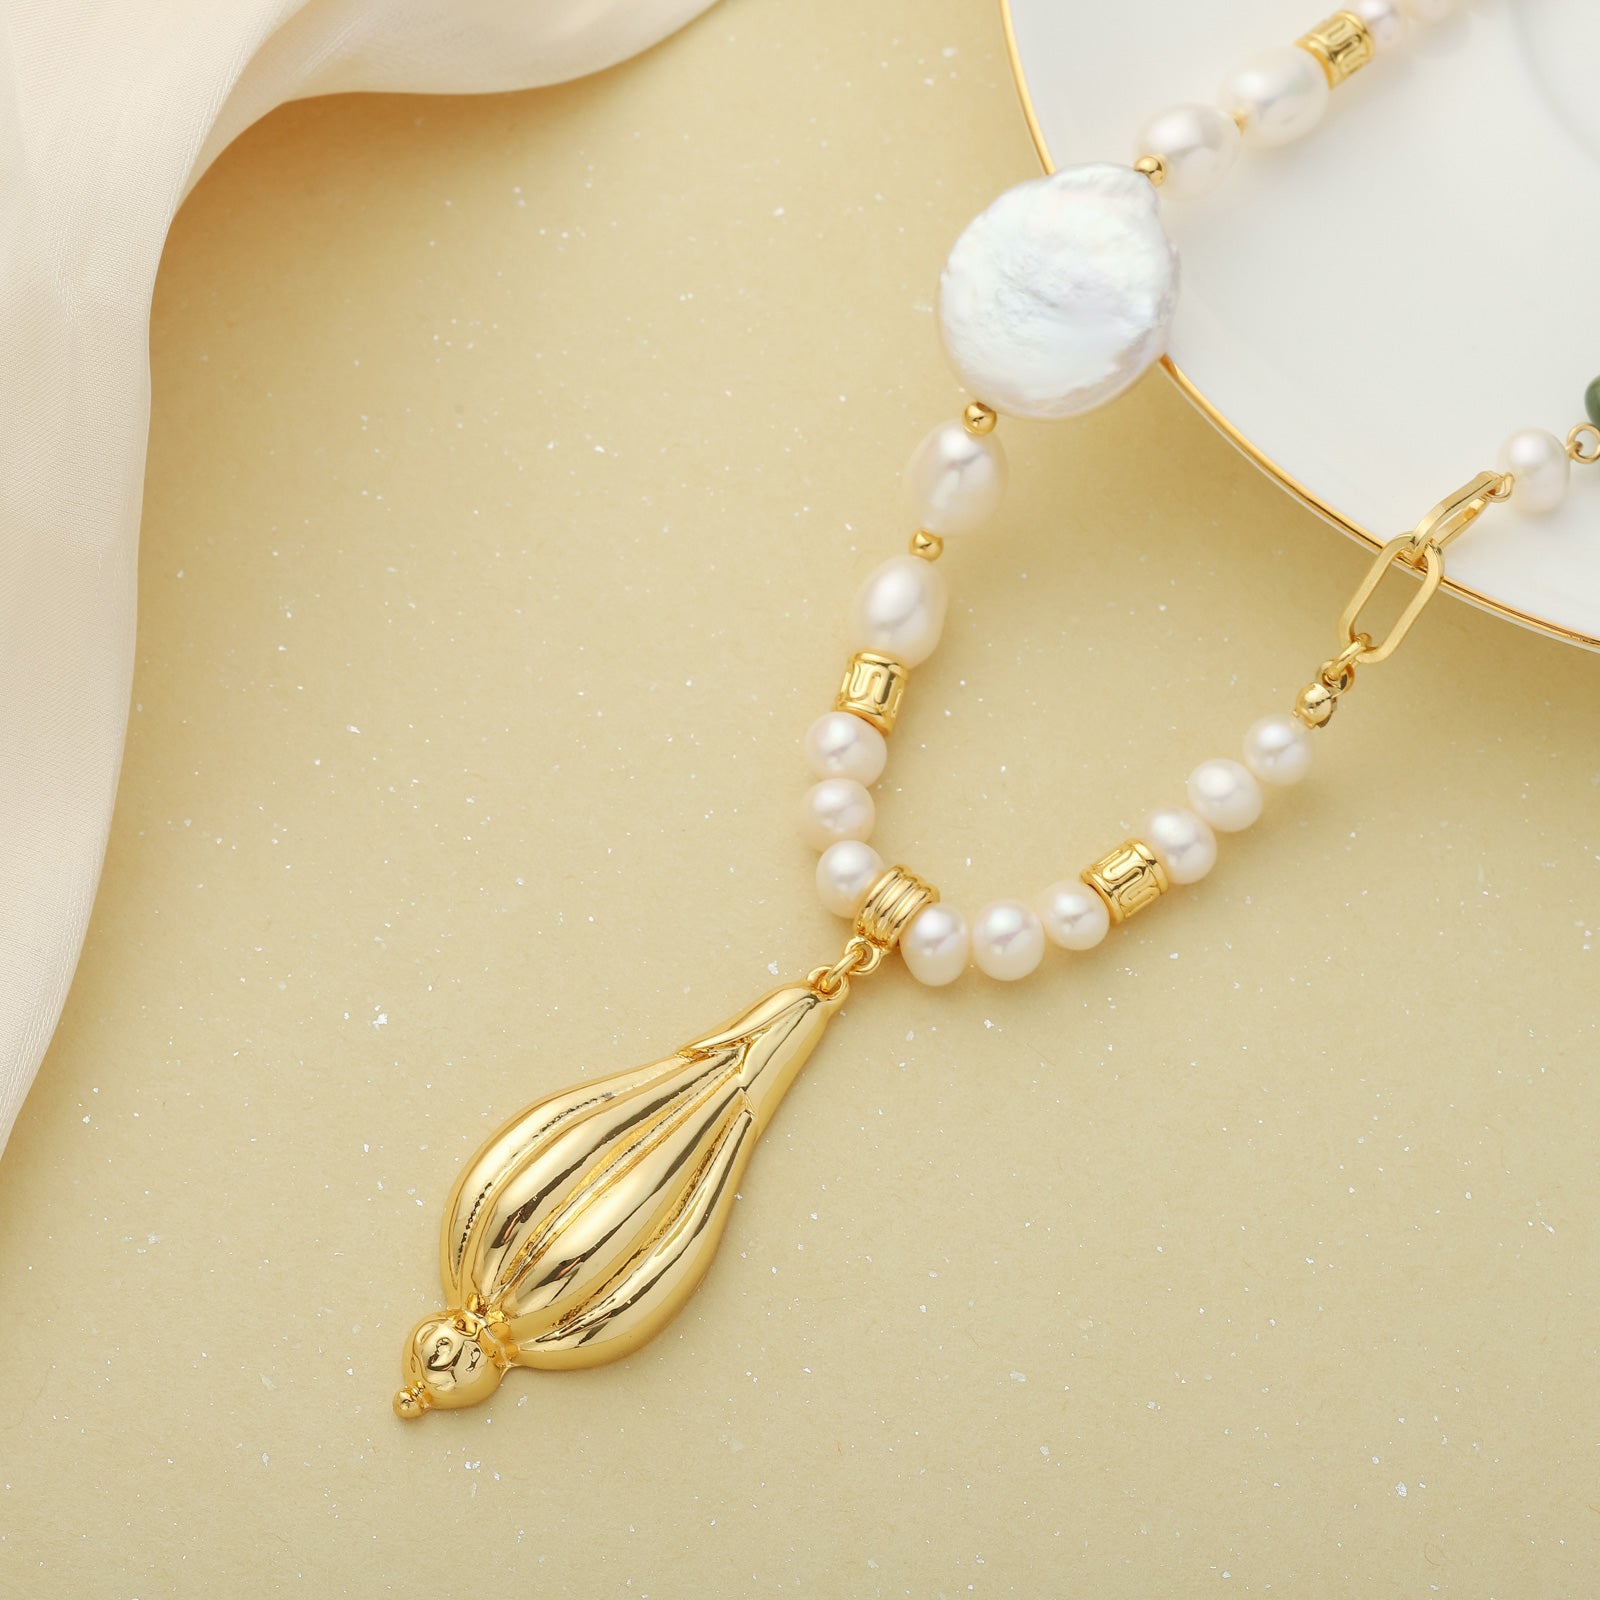 Baroque Daisy Bud Freshwater Pearl Necklace